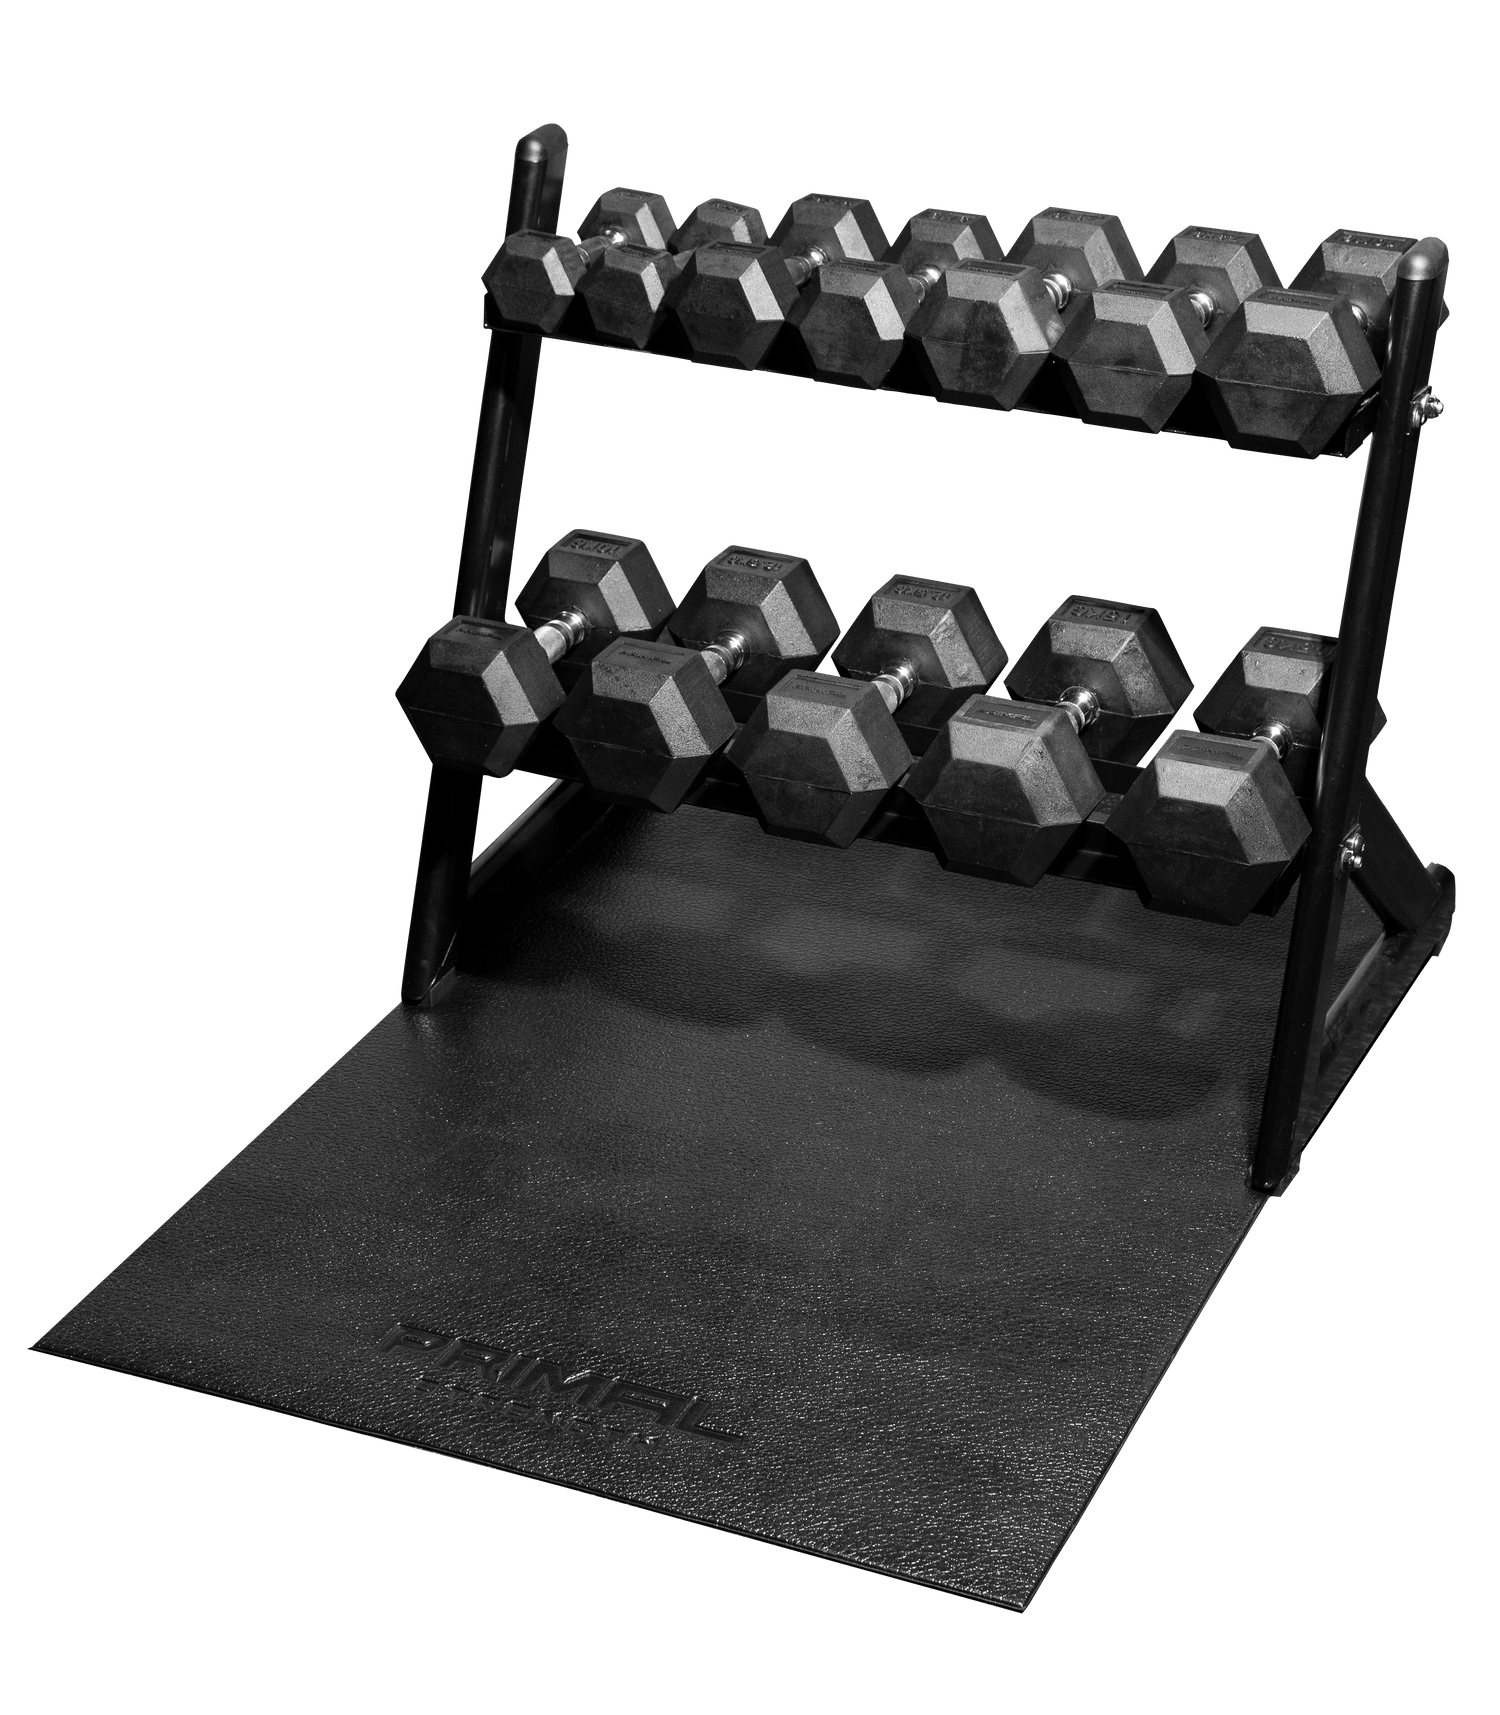 a full 2 tier small dumbbell rack on a black fitness mat